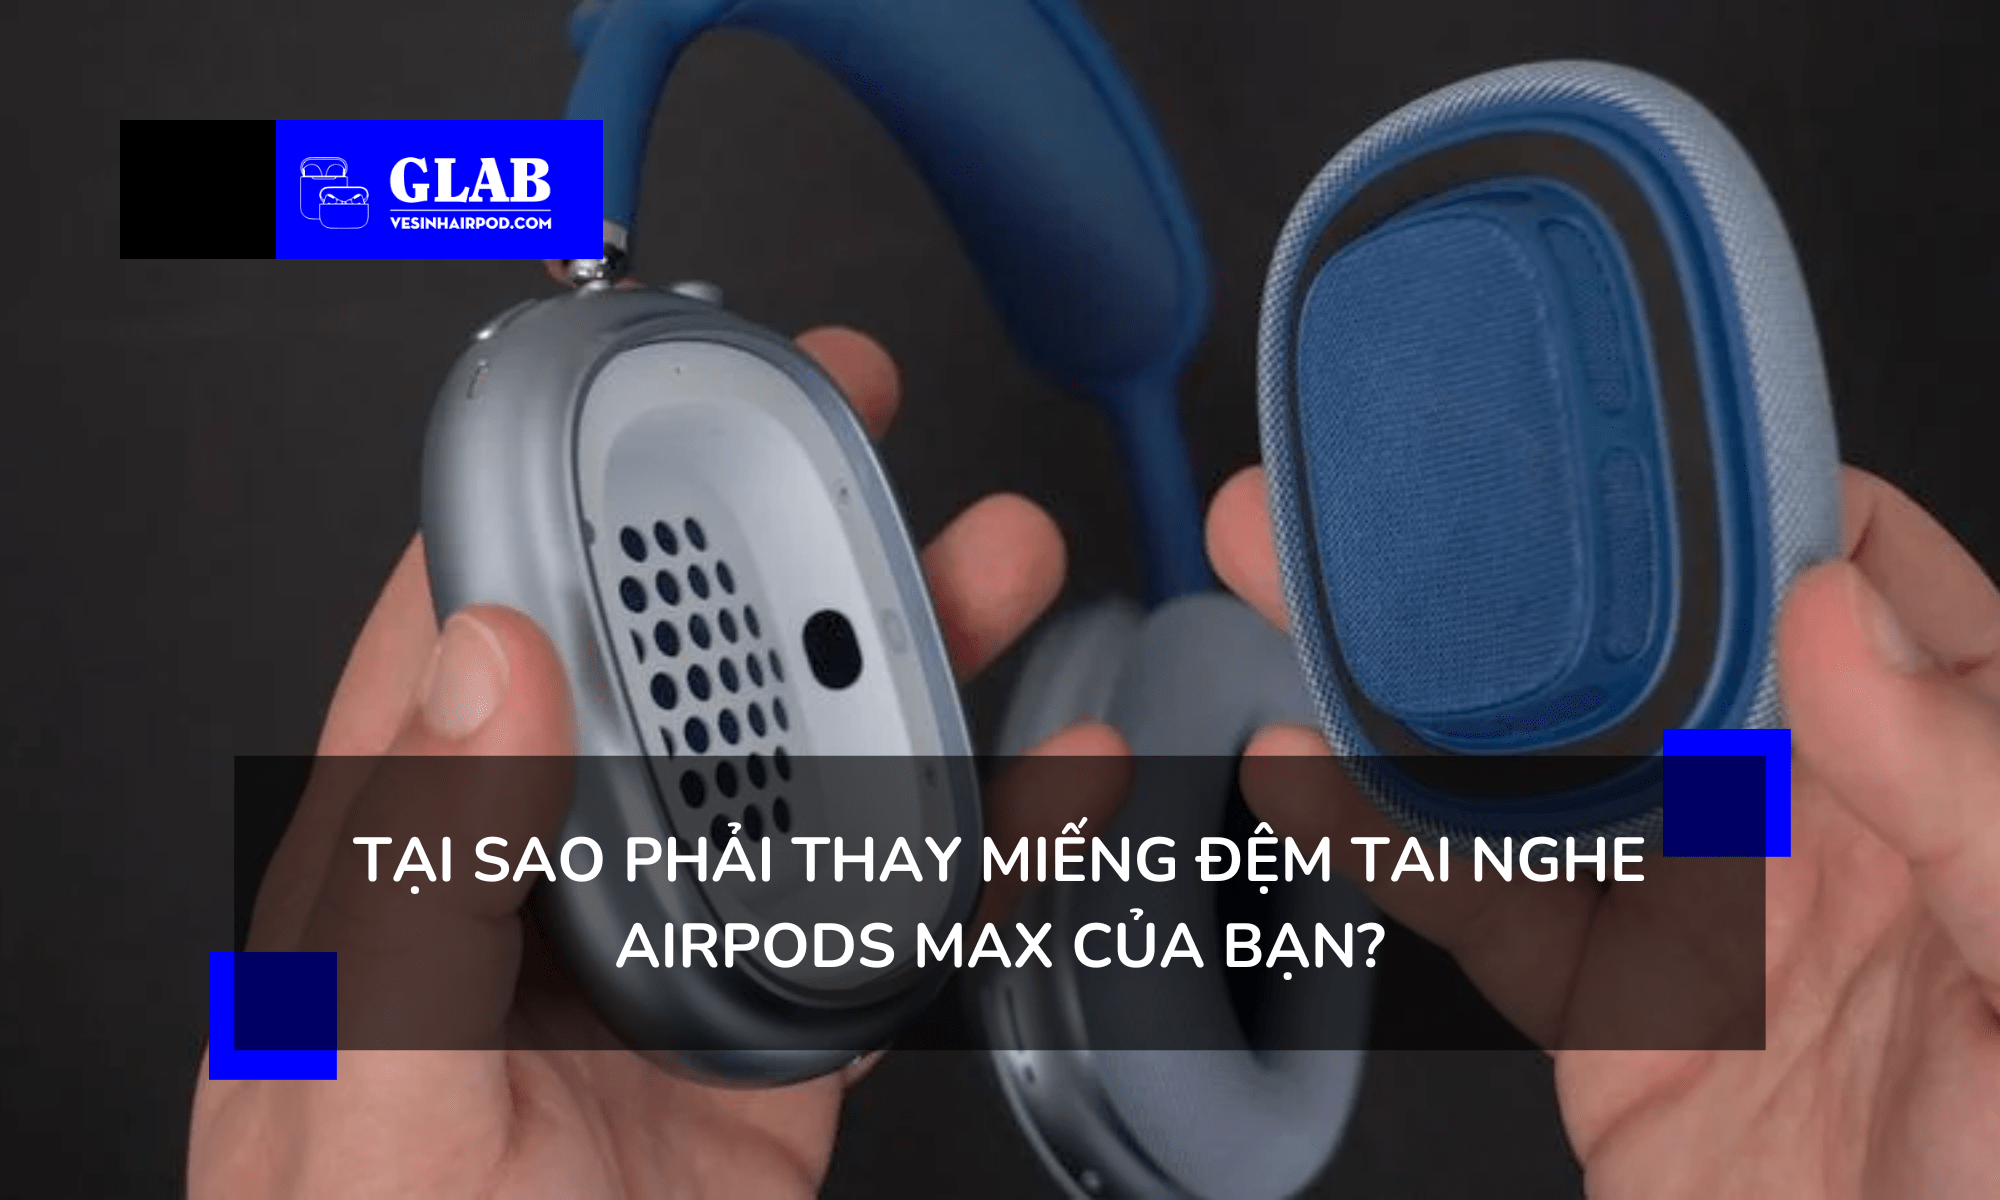 cach-thay-mieng-dem-tai-nghe-airpods-max